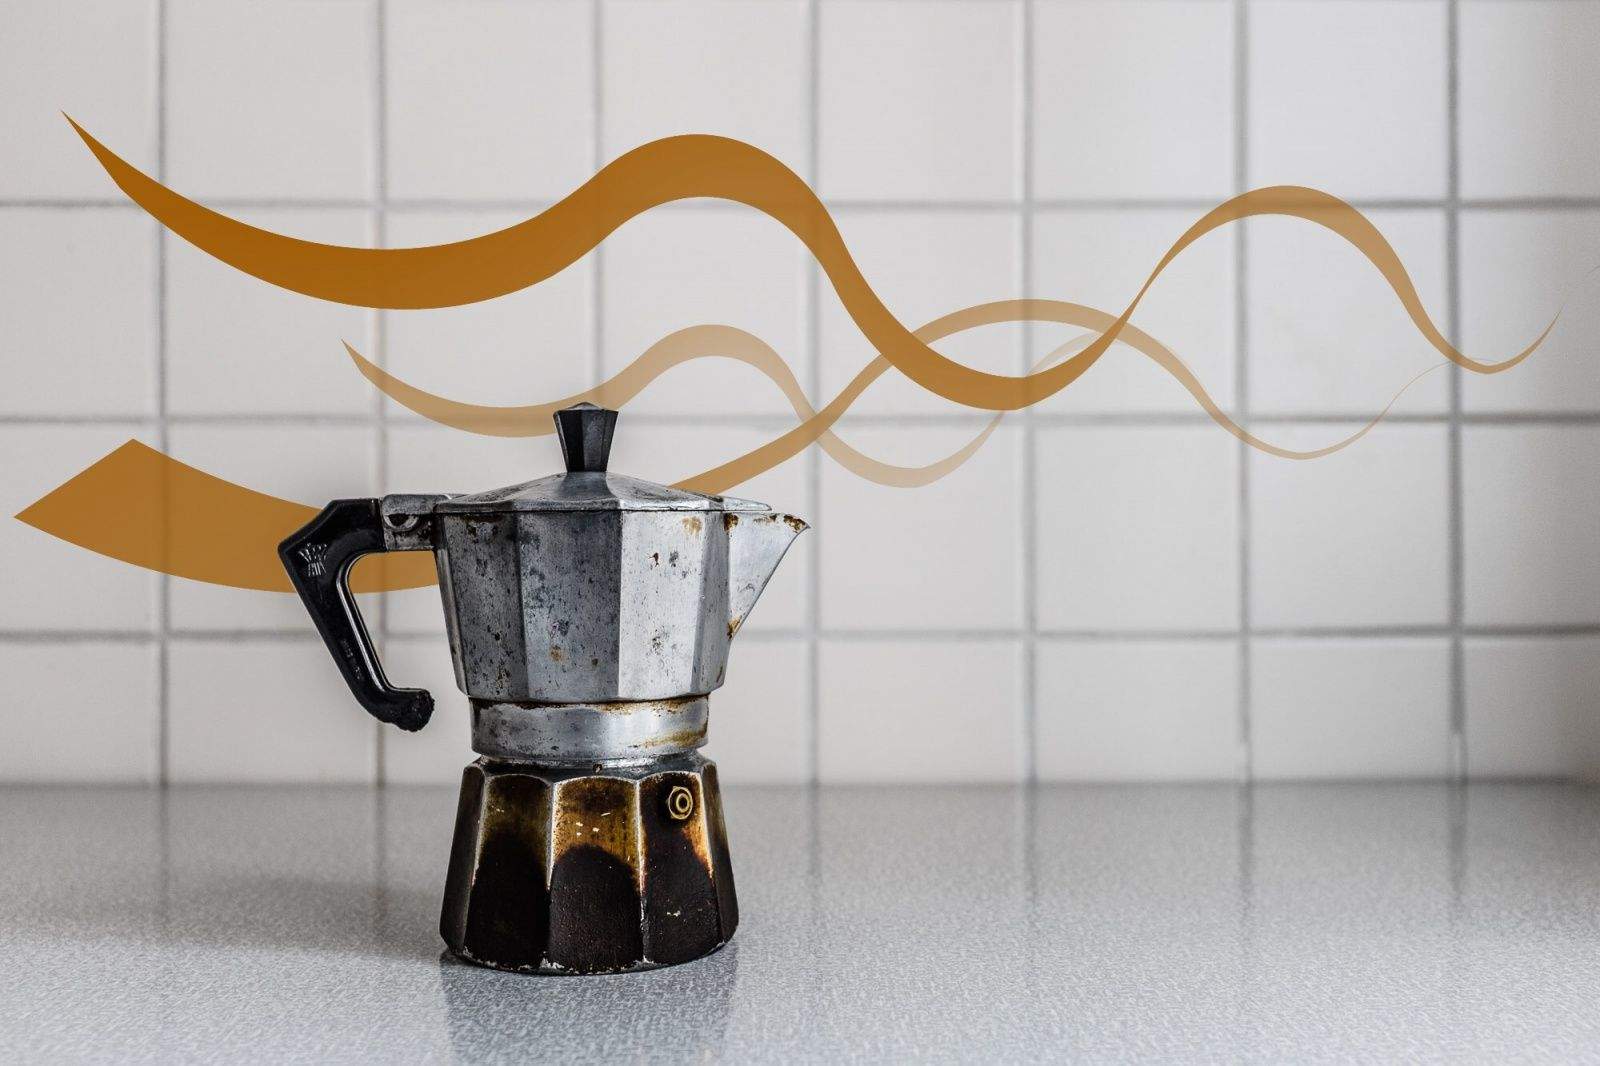 The moka pot was designed over 80 years ago, but still beats most modern methods. Photos Charlie Sorrel/Cult of Mac